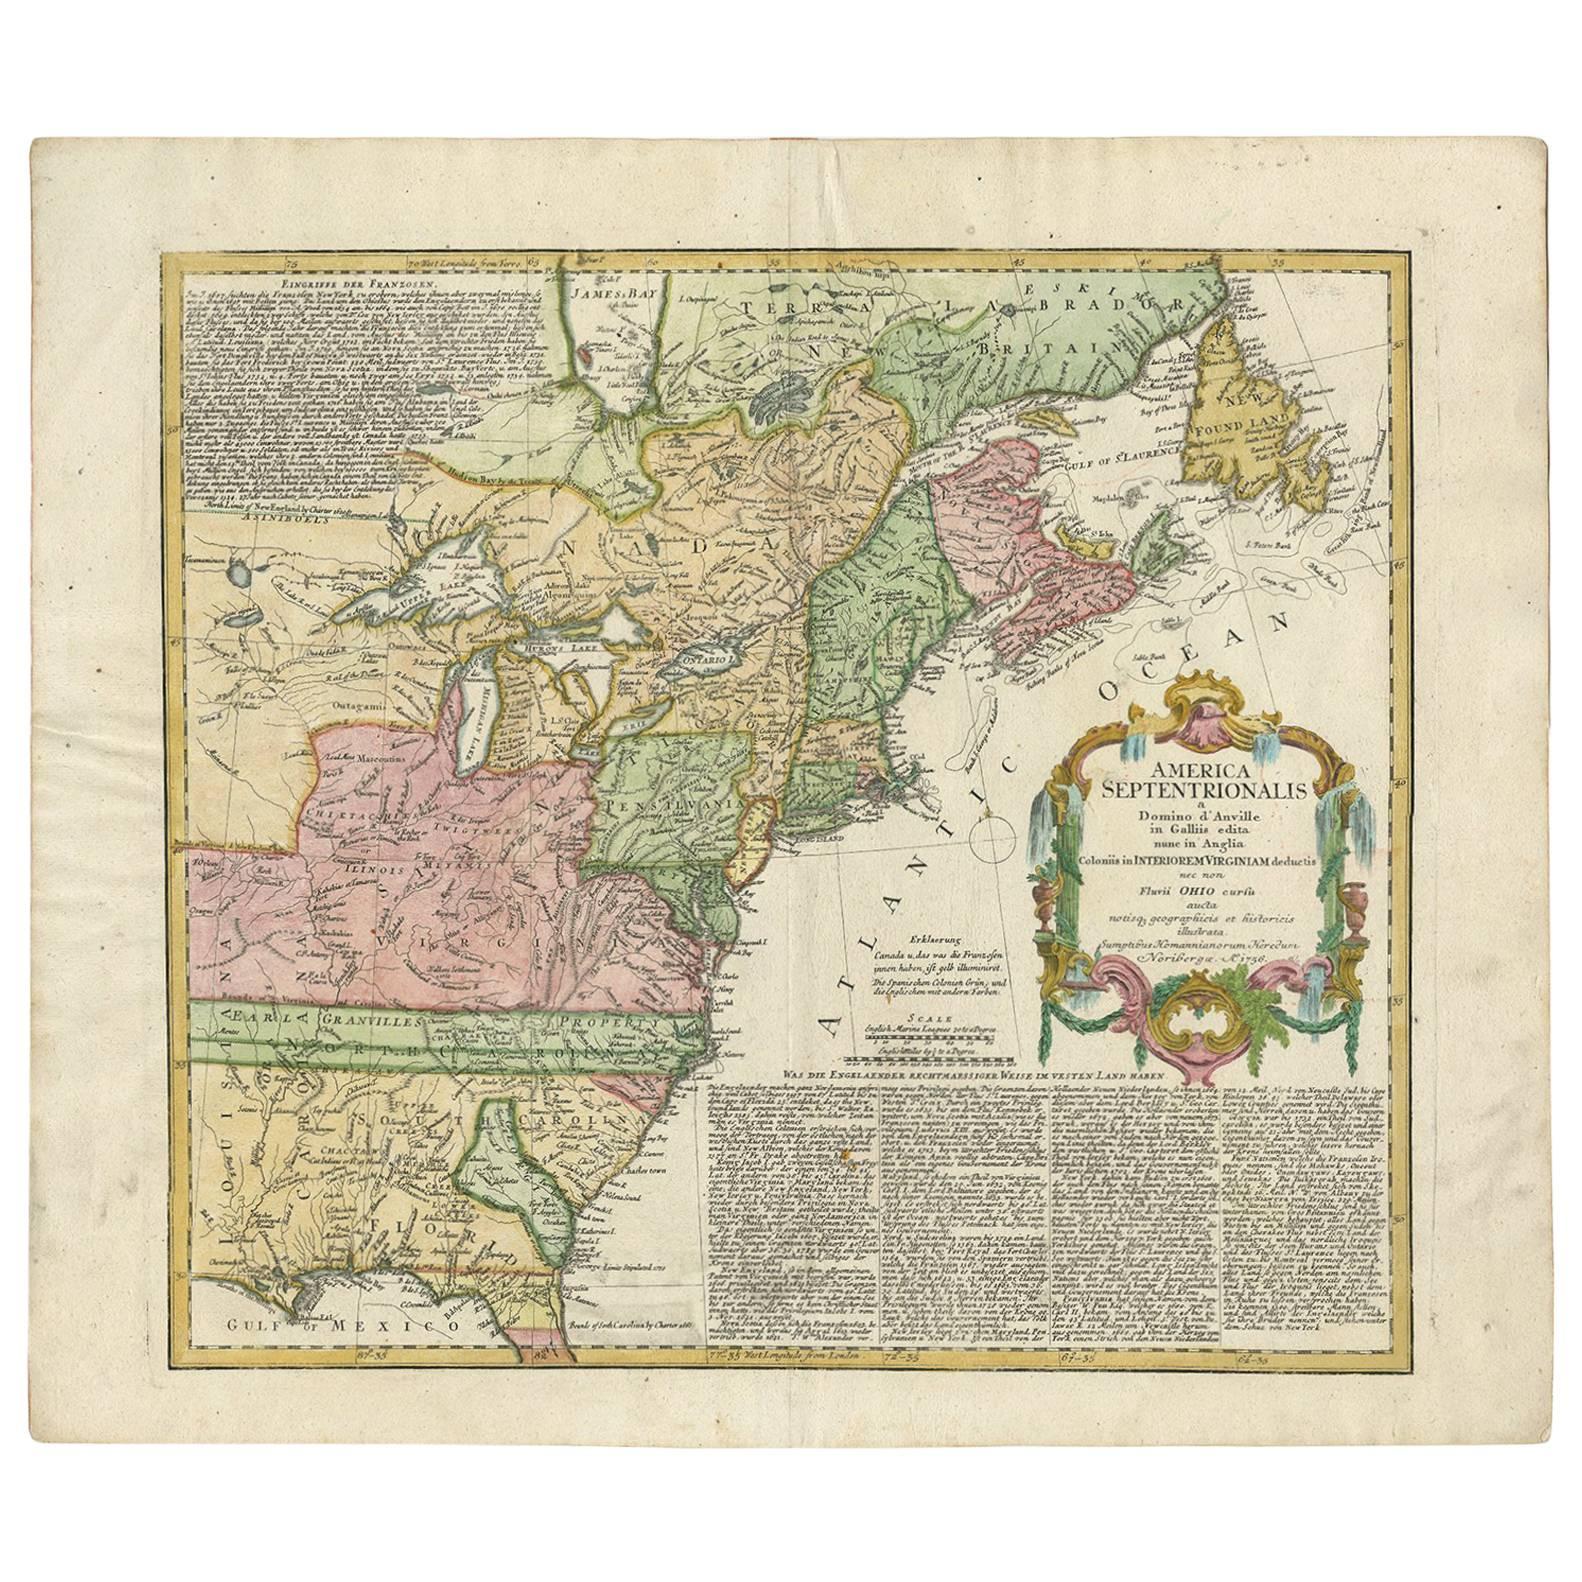 Antique Map of the British Colonies in North America by Homann Heirs, 1756